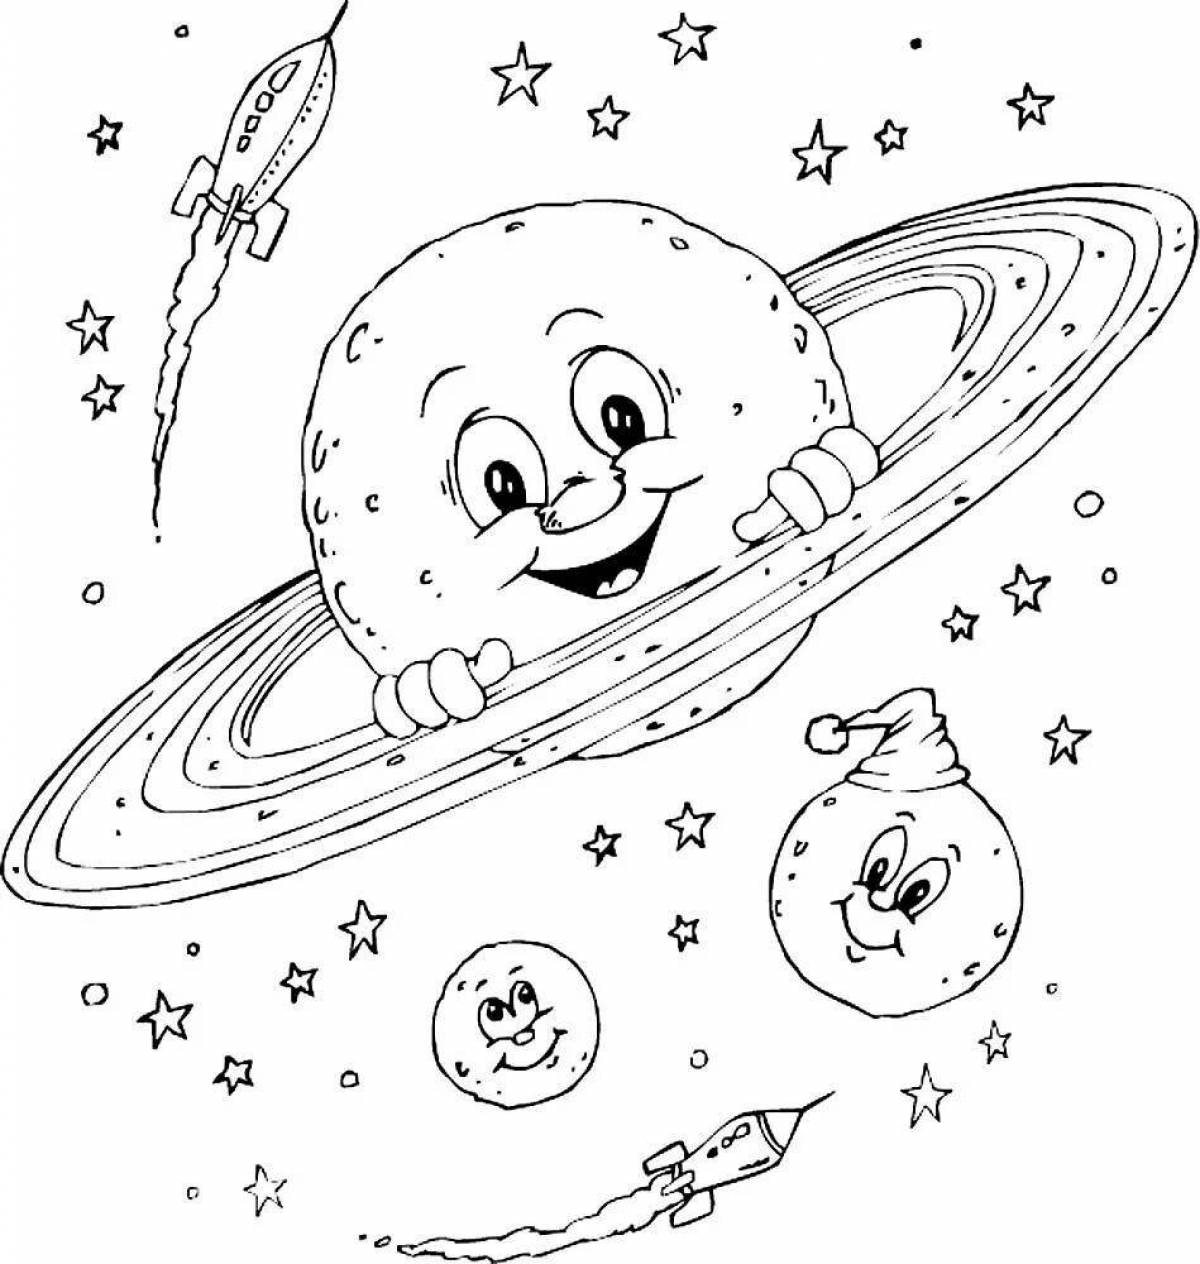 Starry space coloring page